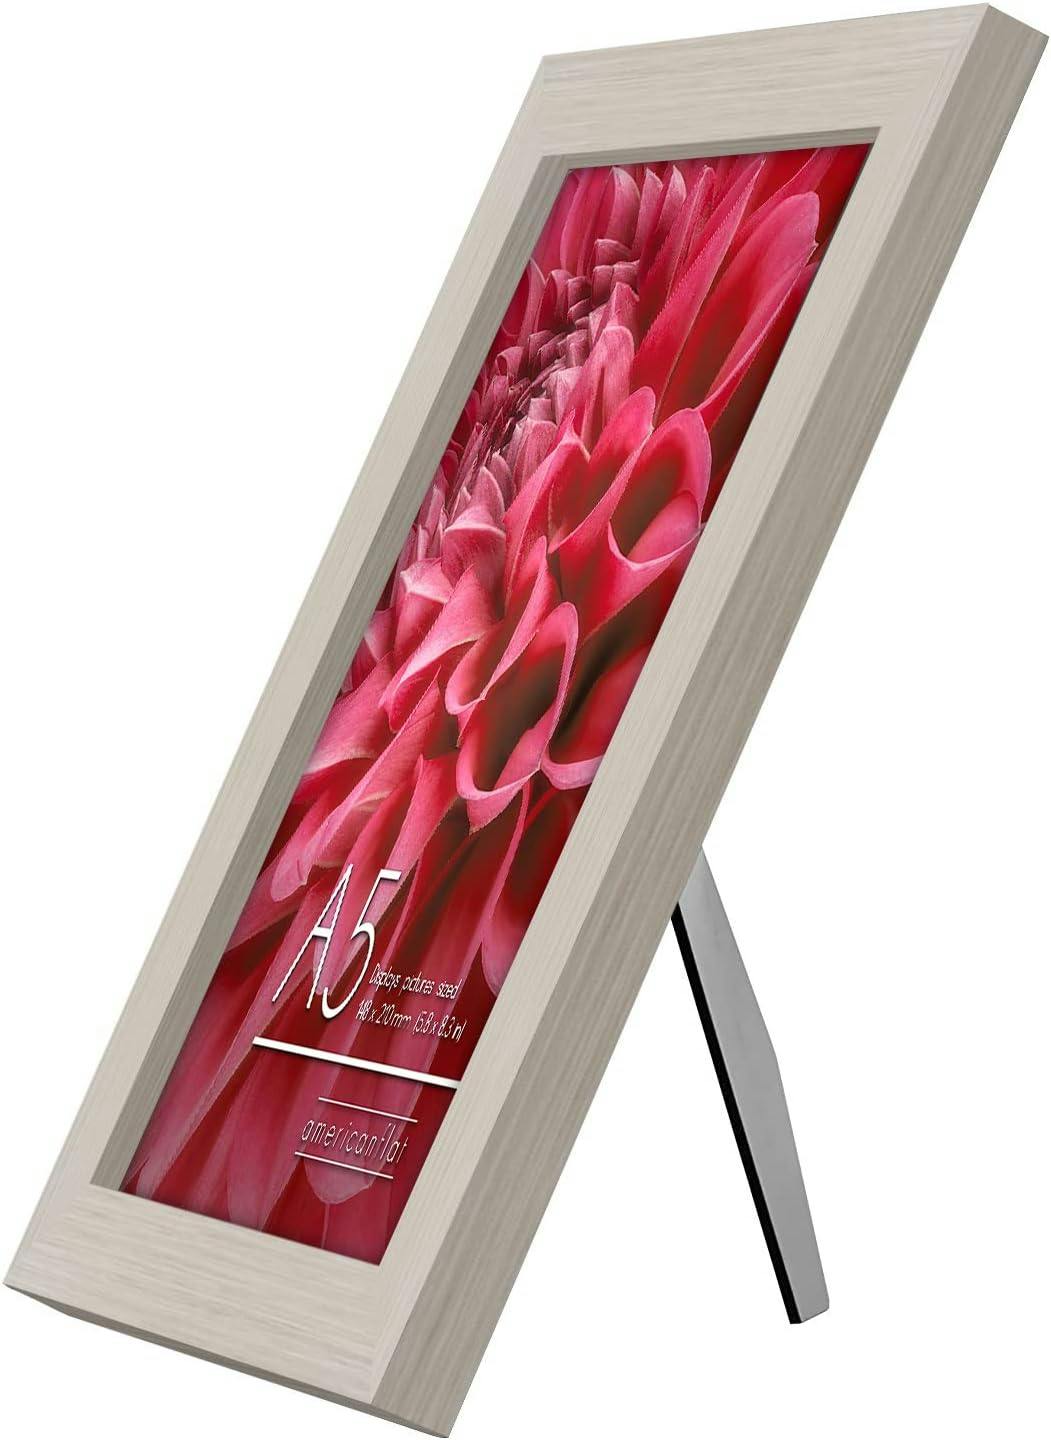 Classic Gallery-Style Light Wood A5 Picture Frame